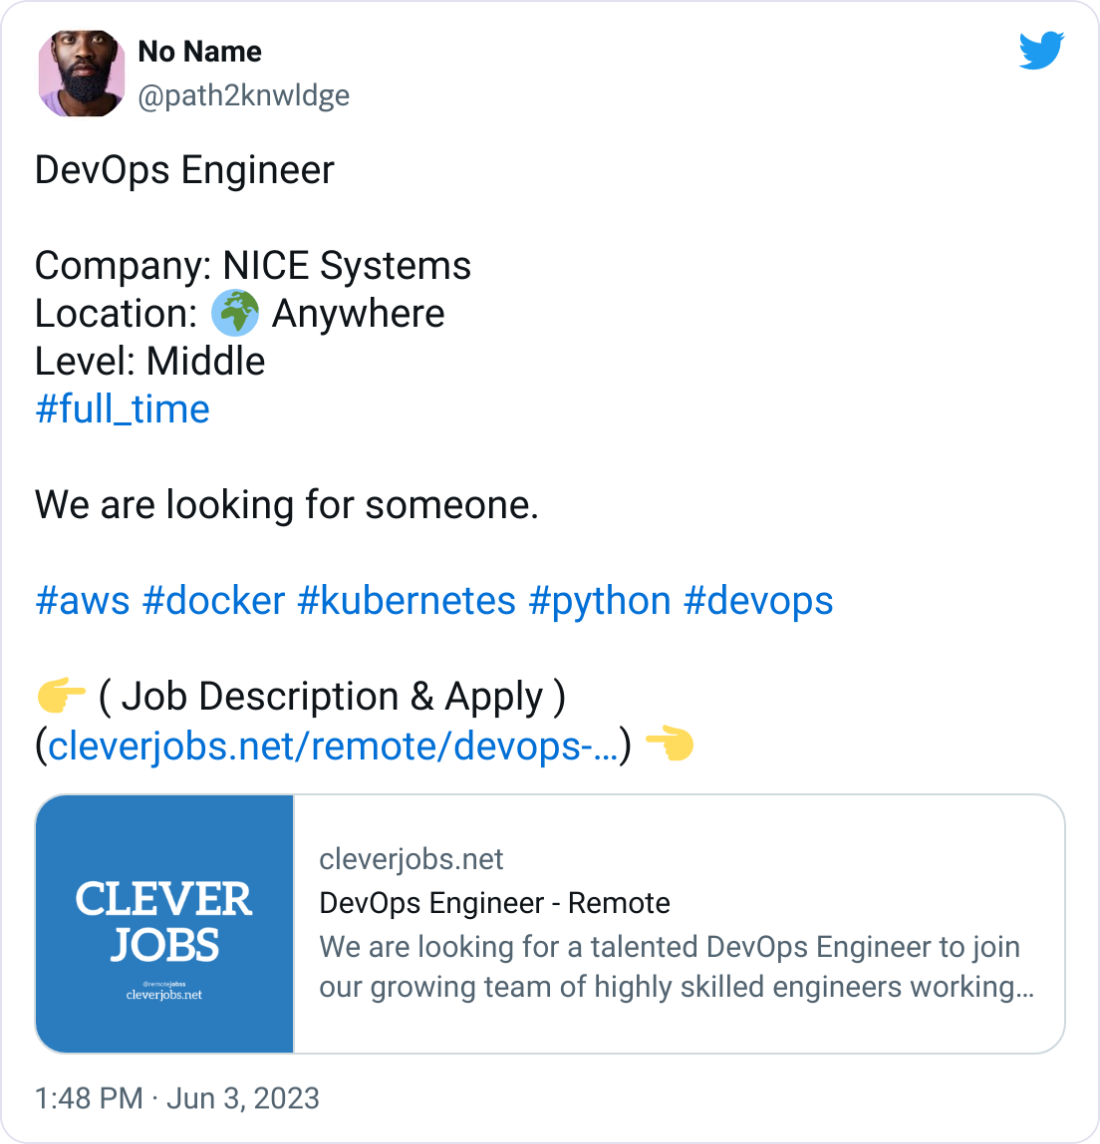 No Name @path2knwldge DevOps Engineer  Company: NICE Systems Location: 🌍 Anywhere Level: Middle #full_time   We are looking for someone.  #aws #docker #kubernetes #python #devops  👉 ( Job Description & Apply ) (https://cleverjobs.net/remote/devops-engineer-at-nice-systems-mqr8r) 👈